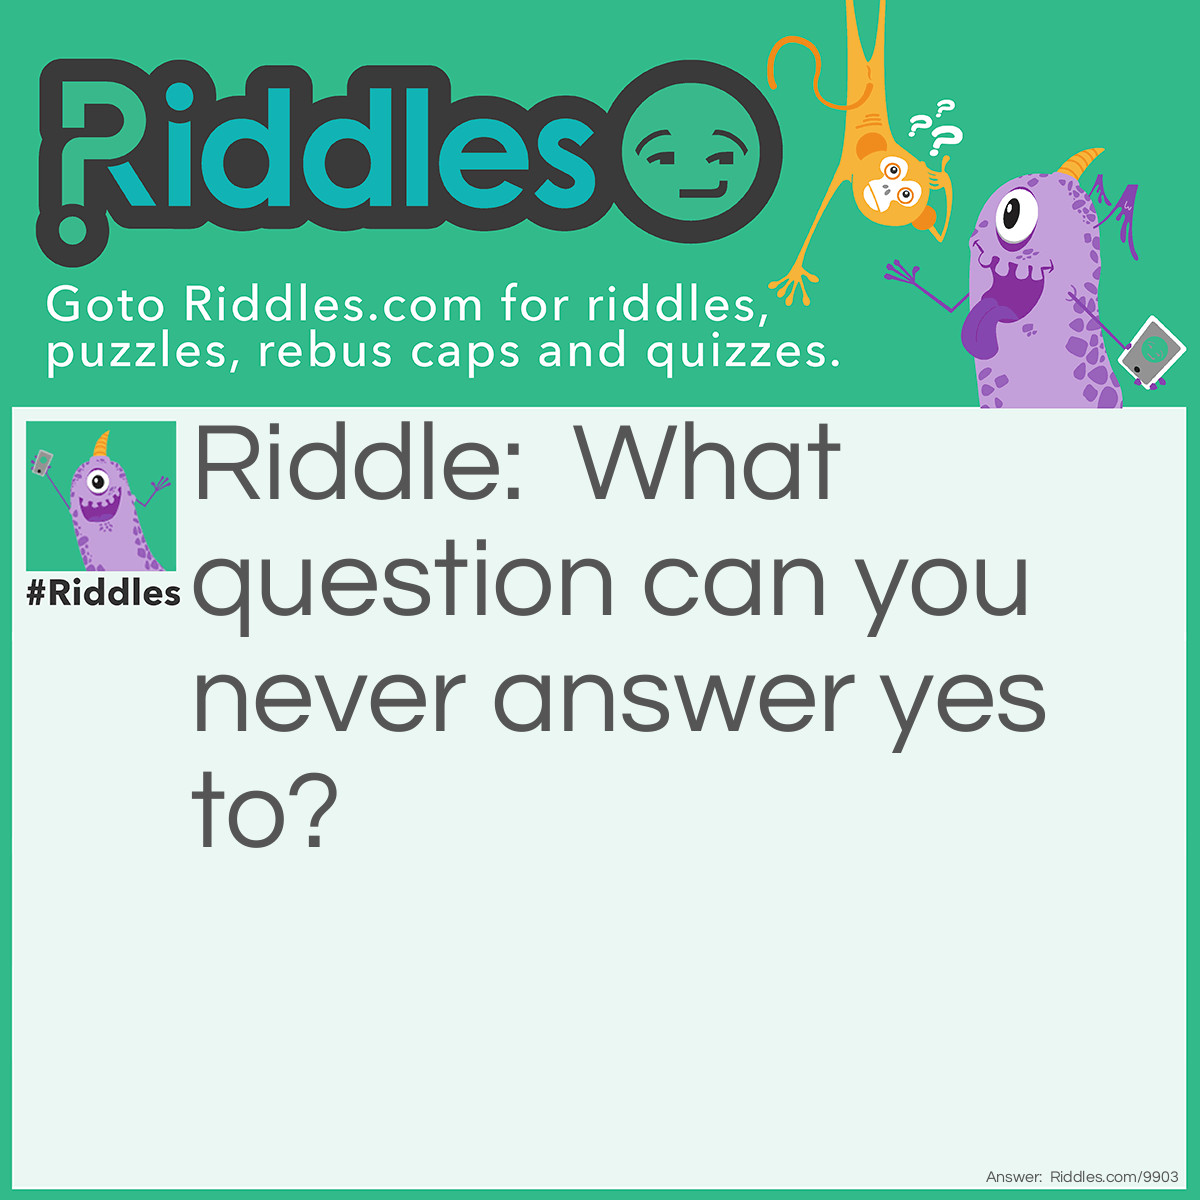 Riddle: What question can you never answer yes to? Answer: Are you asleep yet?